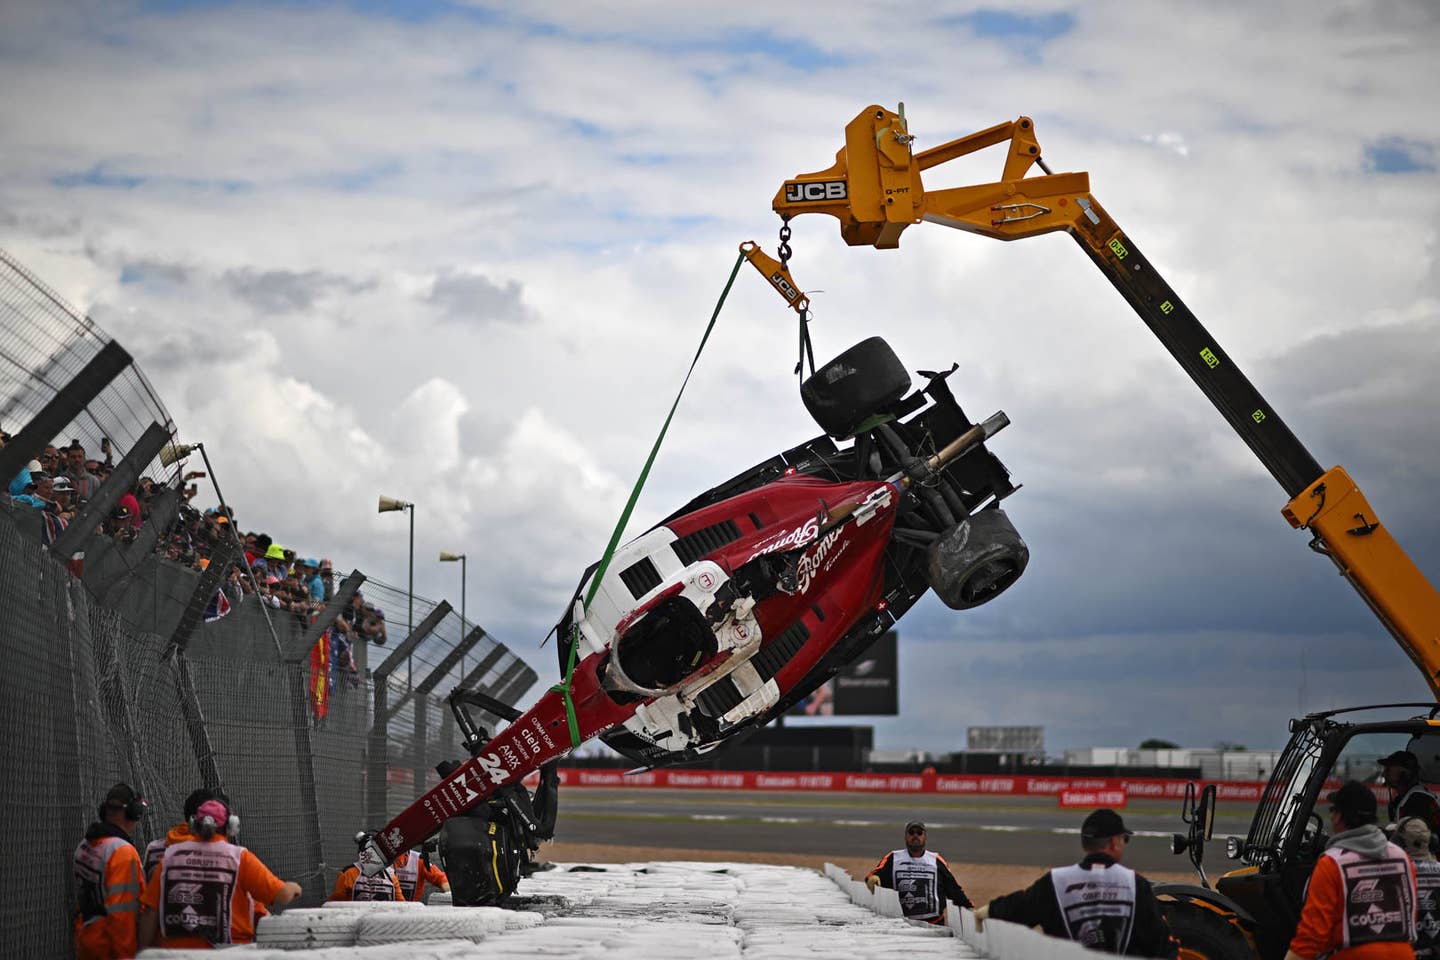 TOPSHOT - Stewards remove the crashed car of Alfa Romeo Chinese driver Zhou Guanyu from the barriers after a crash at the start of the Formula One British Grand Prix at the Silverstone motor racing circuit in Silverstone, central England on July 3, 2022. (Photo by Ben Stansall / AFP) (Photo by BEN STANSALL/AFP via Getty Images)